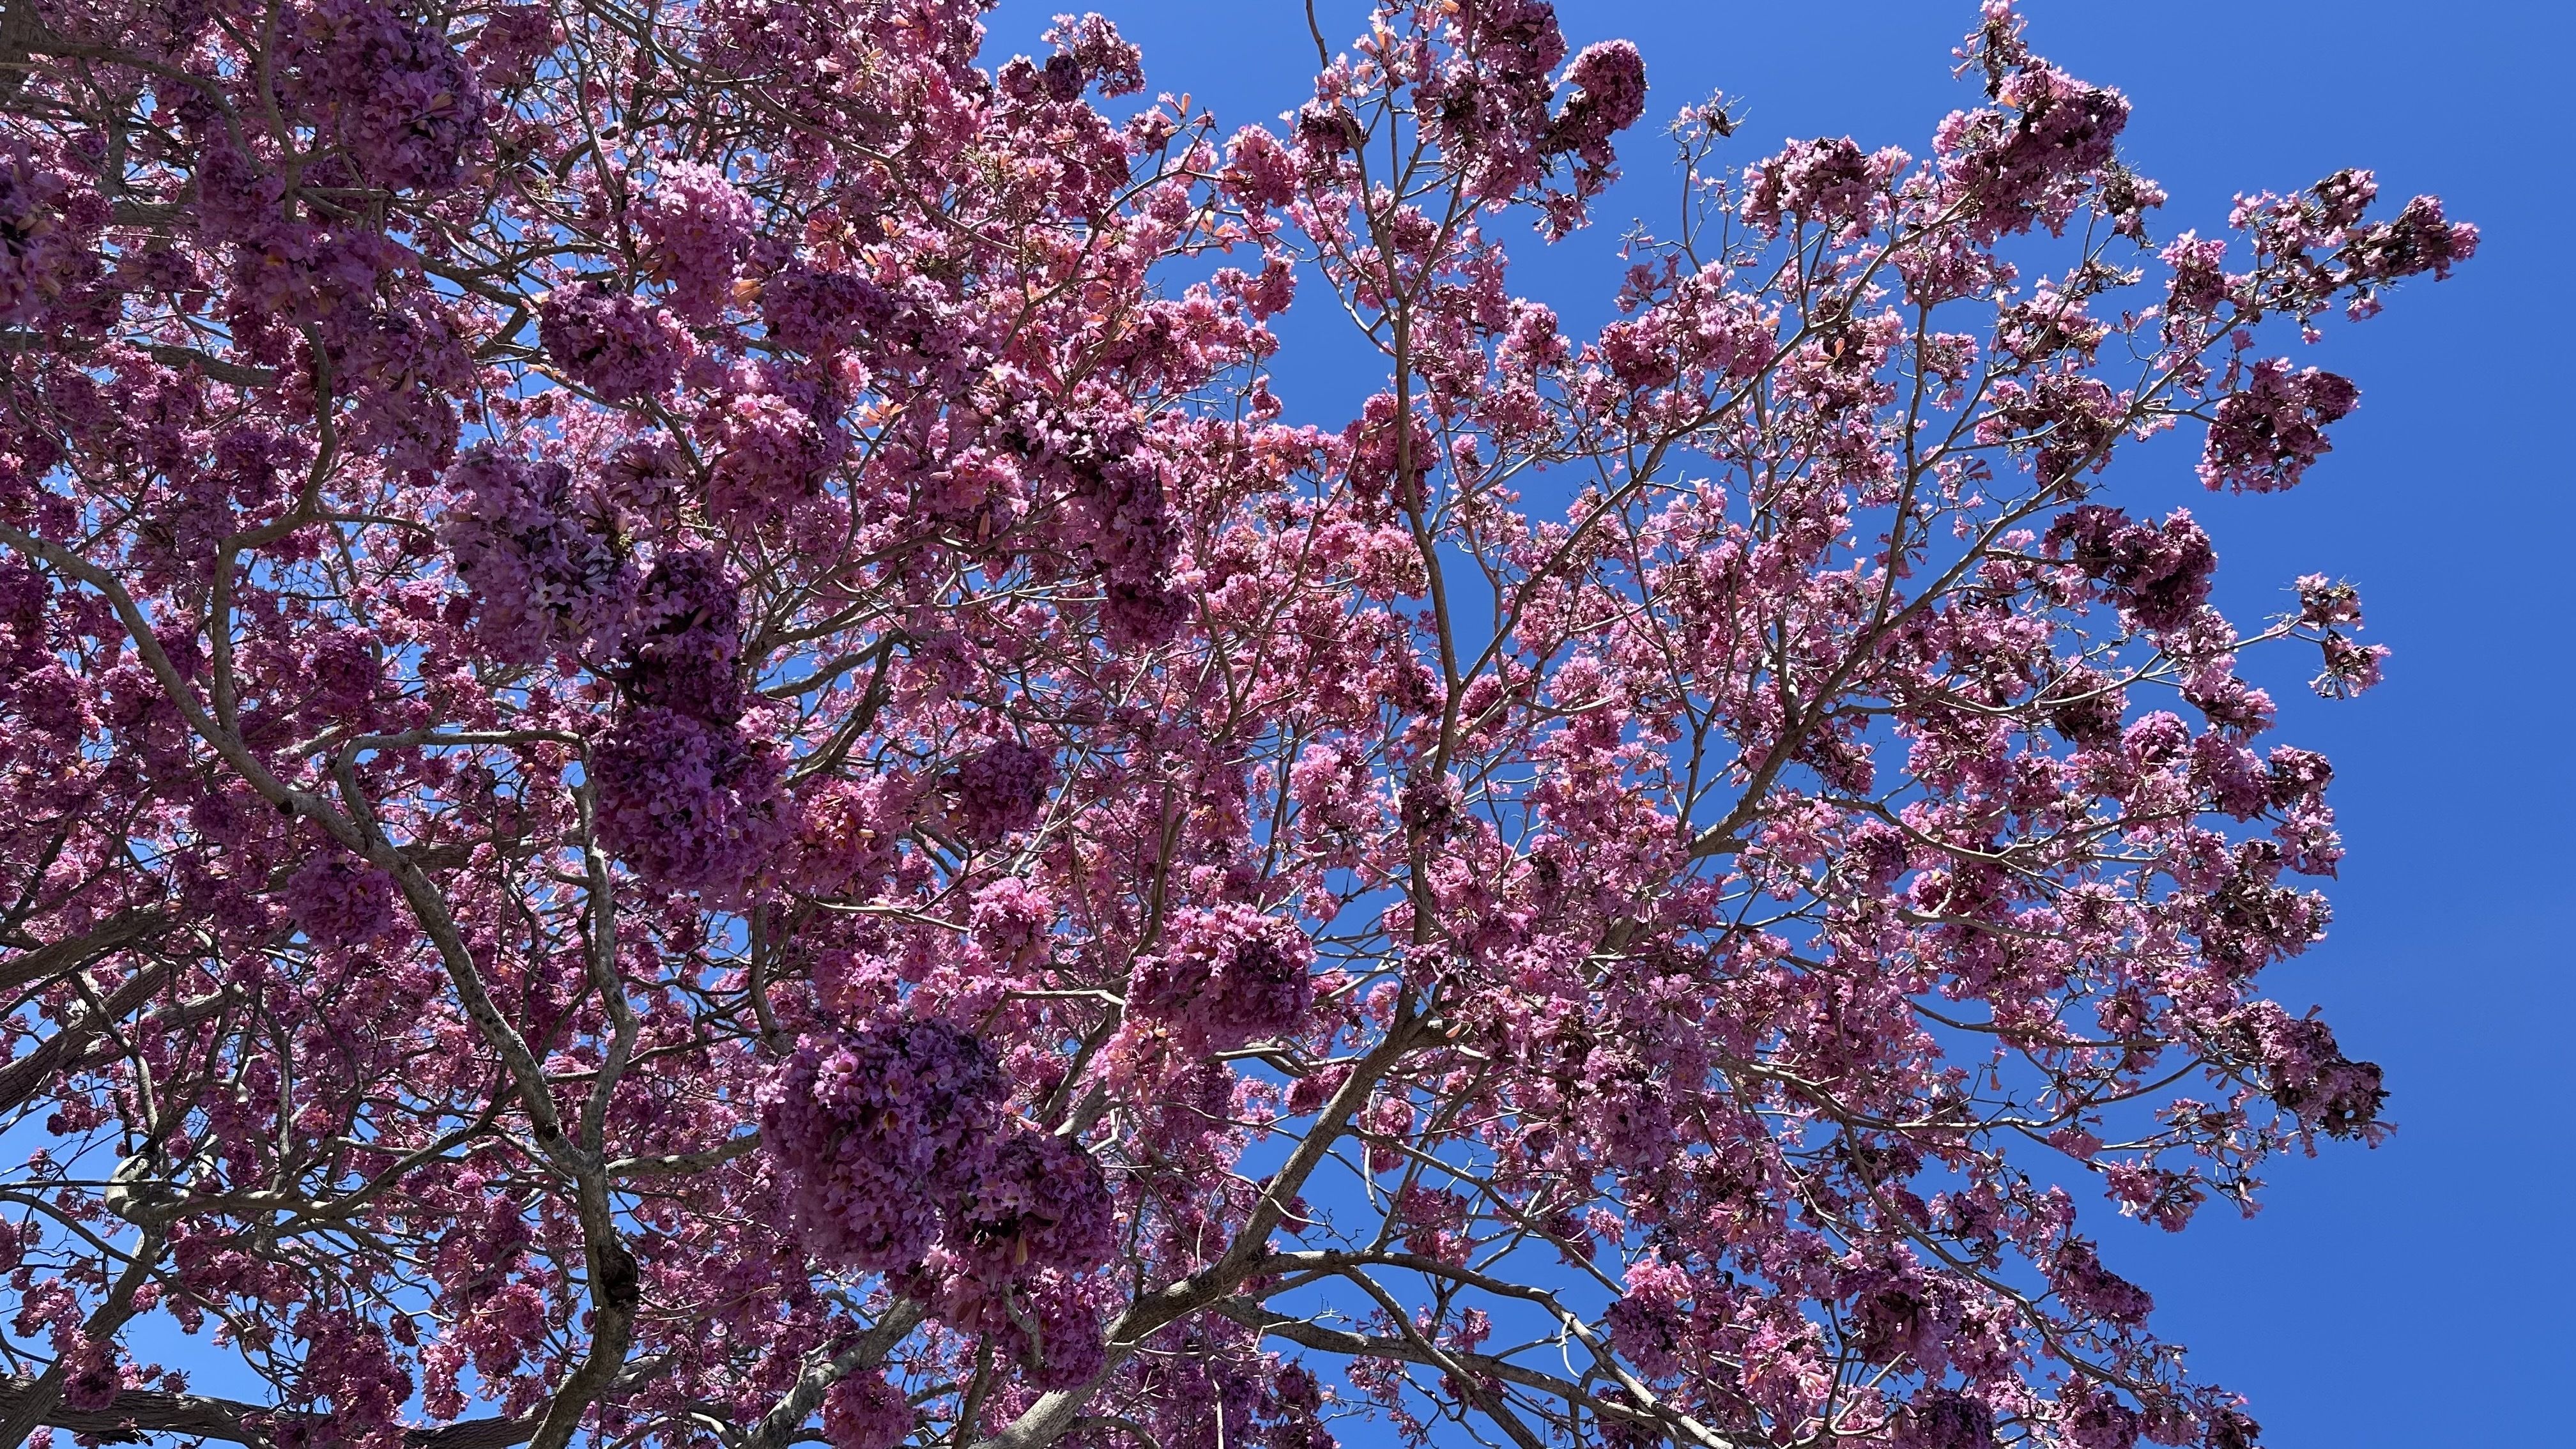 A close up of the pink trumpet tree's blooming branches